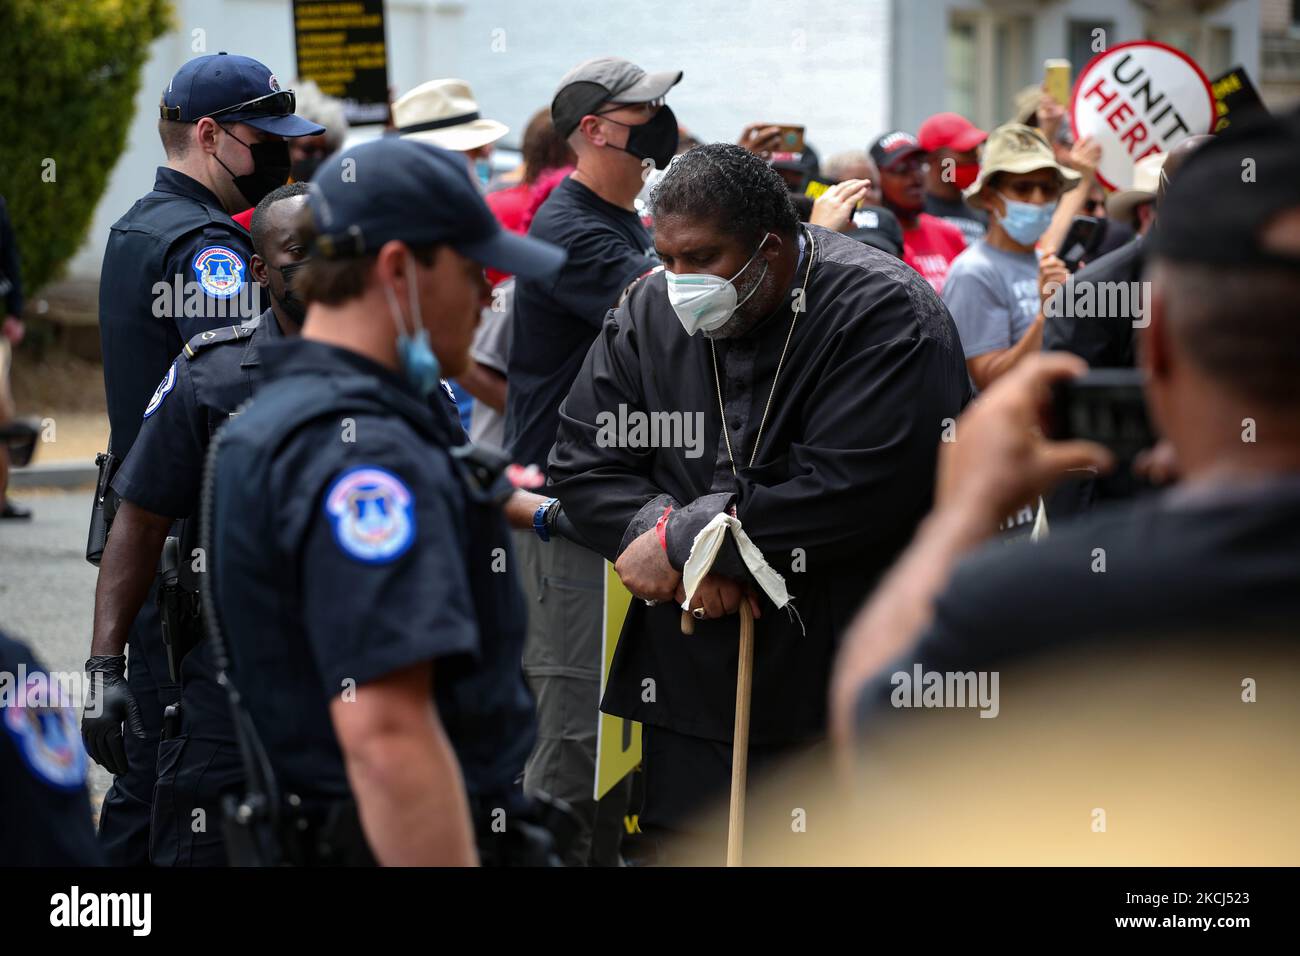 Reverend William Barber is arrested by U.S. Capitol Police during the Poor People's Campaign Moral Monday demonstration and civil disobedience action near the U.S. Capitol in Washington, D.C. on August 2, 2021 (Photo by Bryan Olin Dozier/NurPhoto) Stock Photo